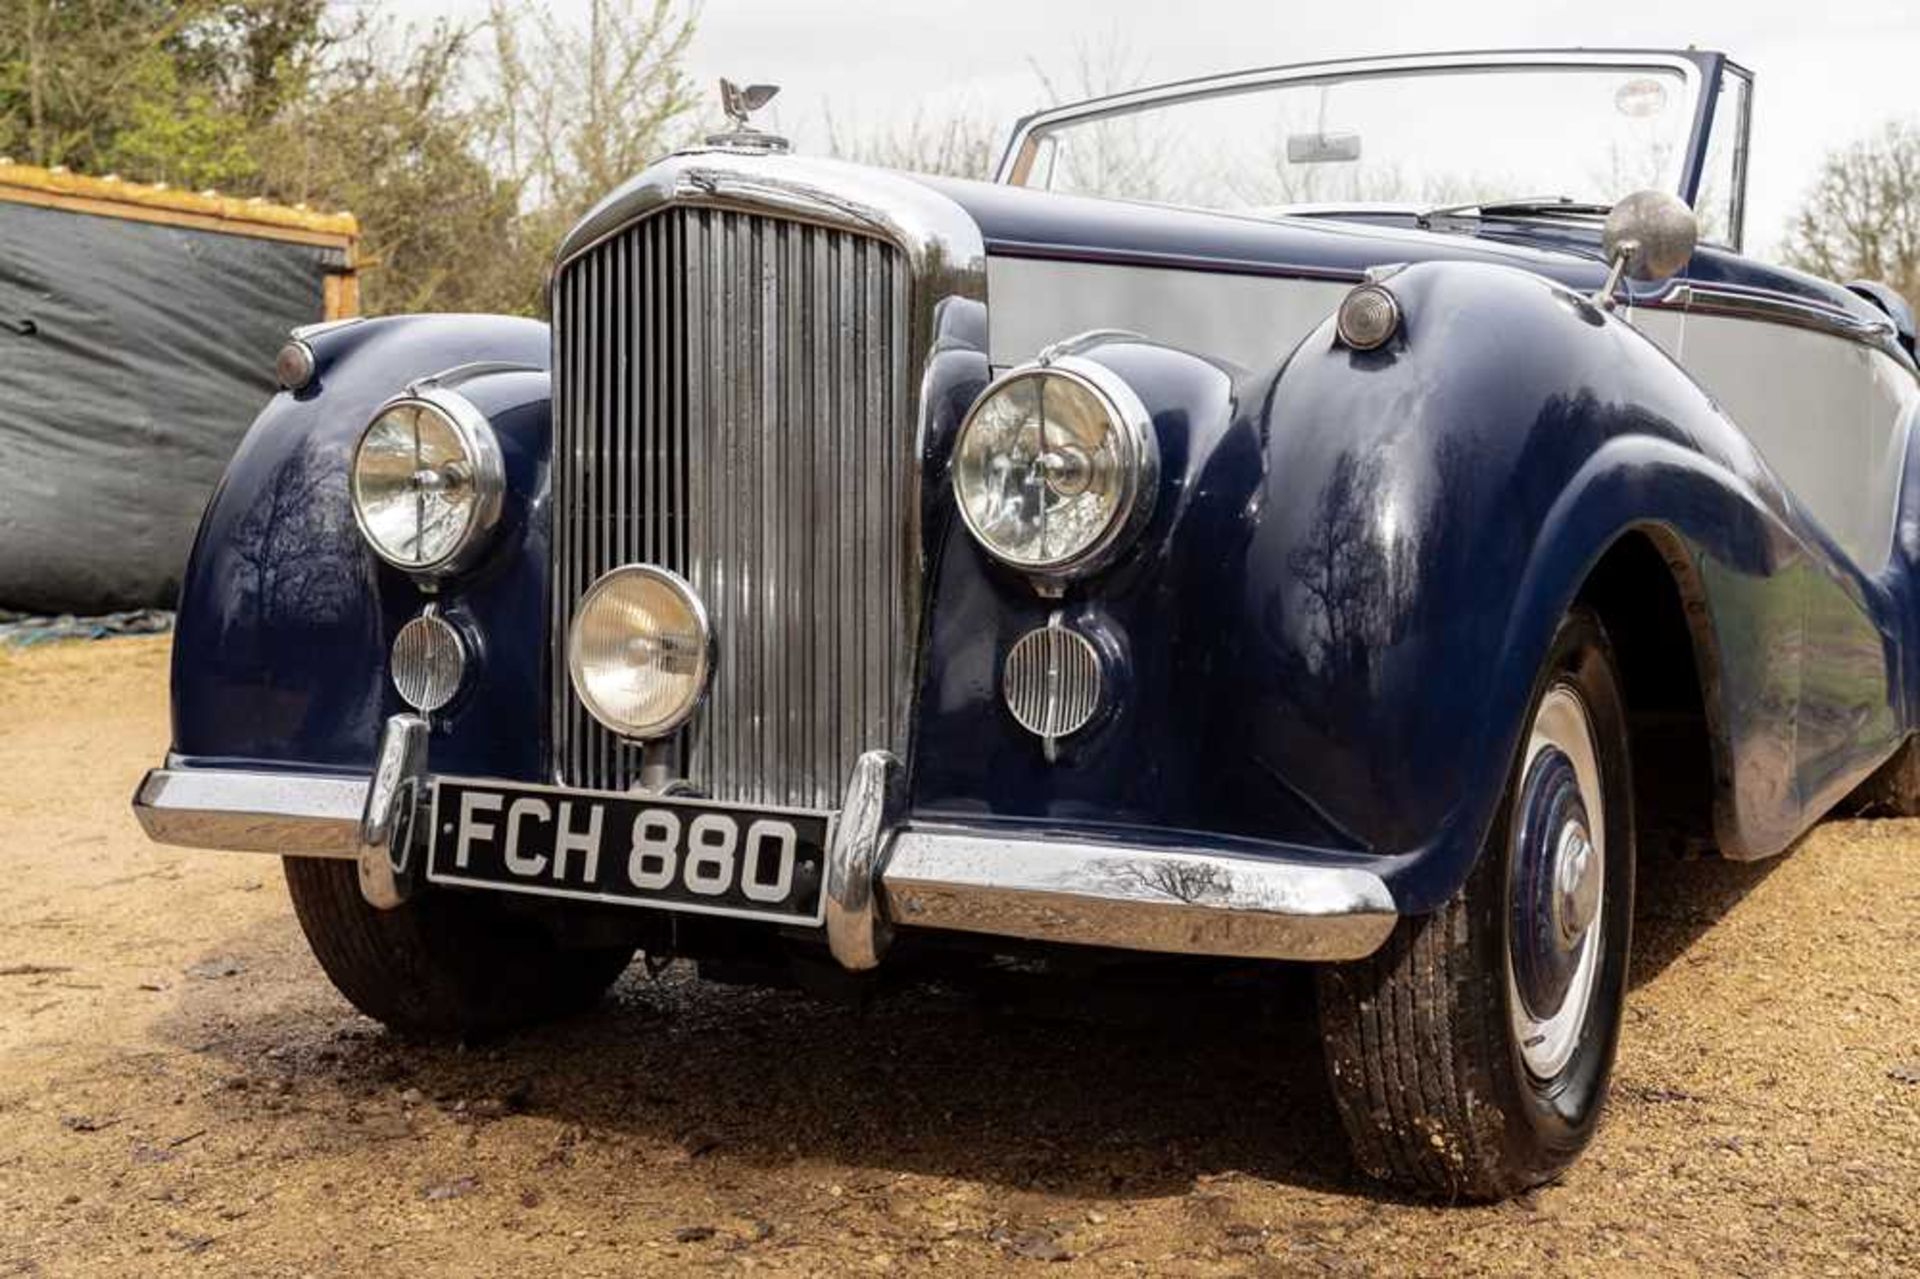 1954 Bentley R-Type Park Ward Drophead Coupe 1 of just 9 R-Type chassis clothed to Design 552 - Image 24 of 86